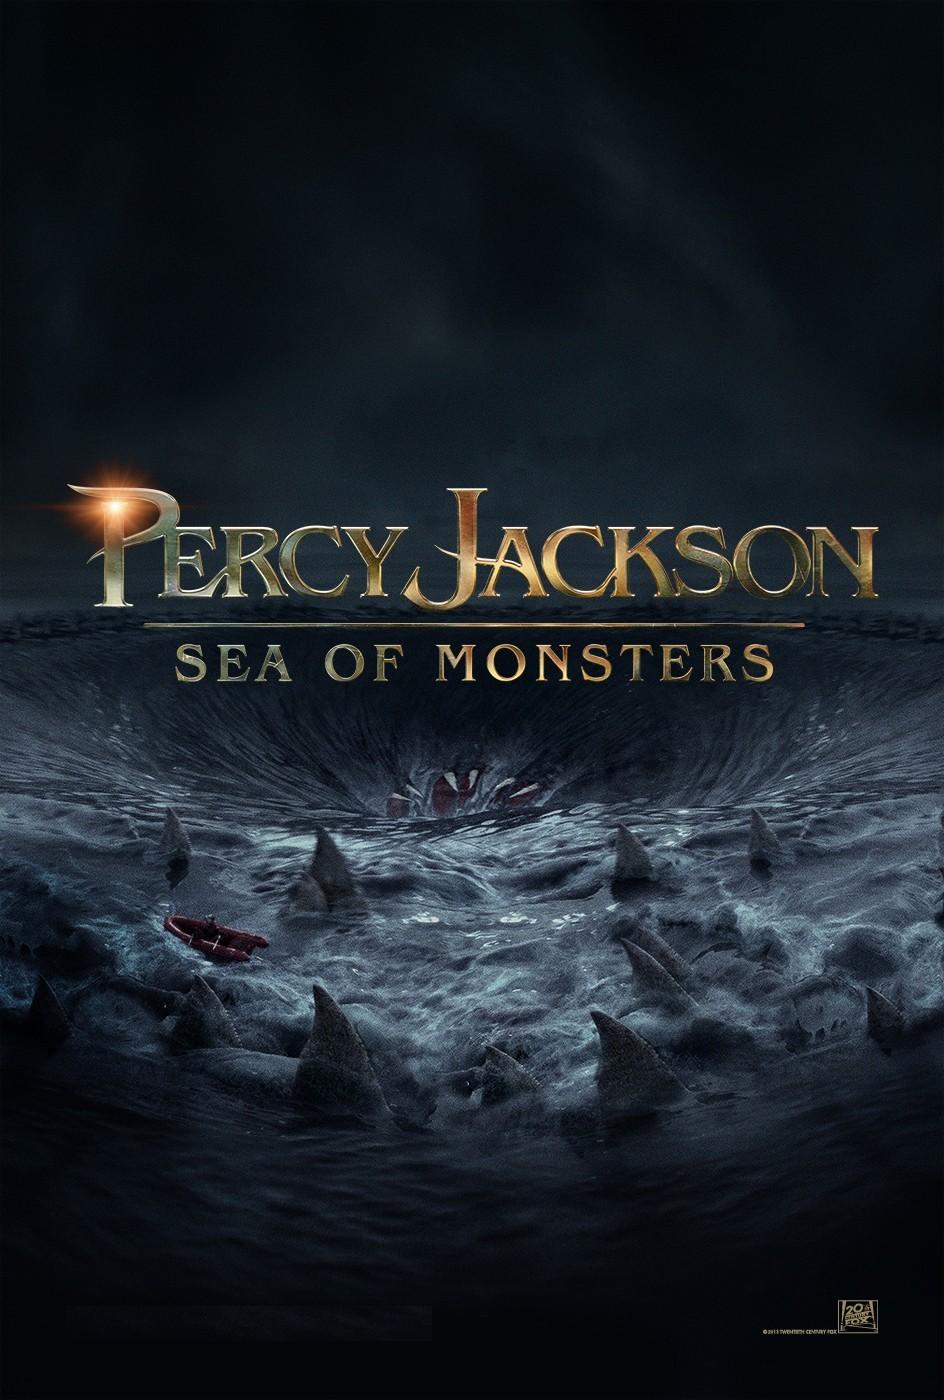 PERCY JACKSON SEA OF MONSTERS Poster